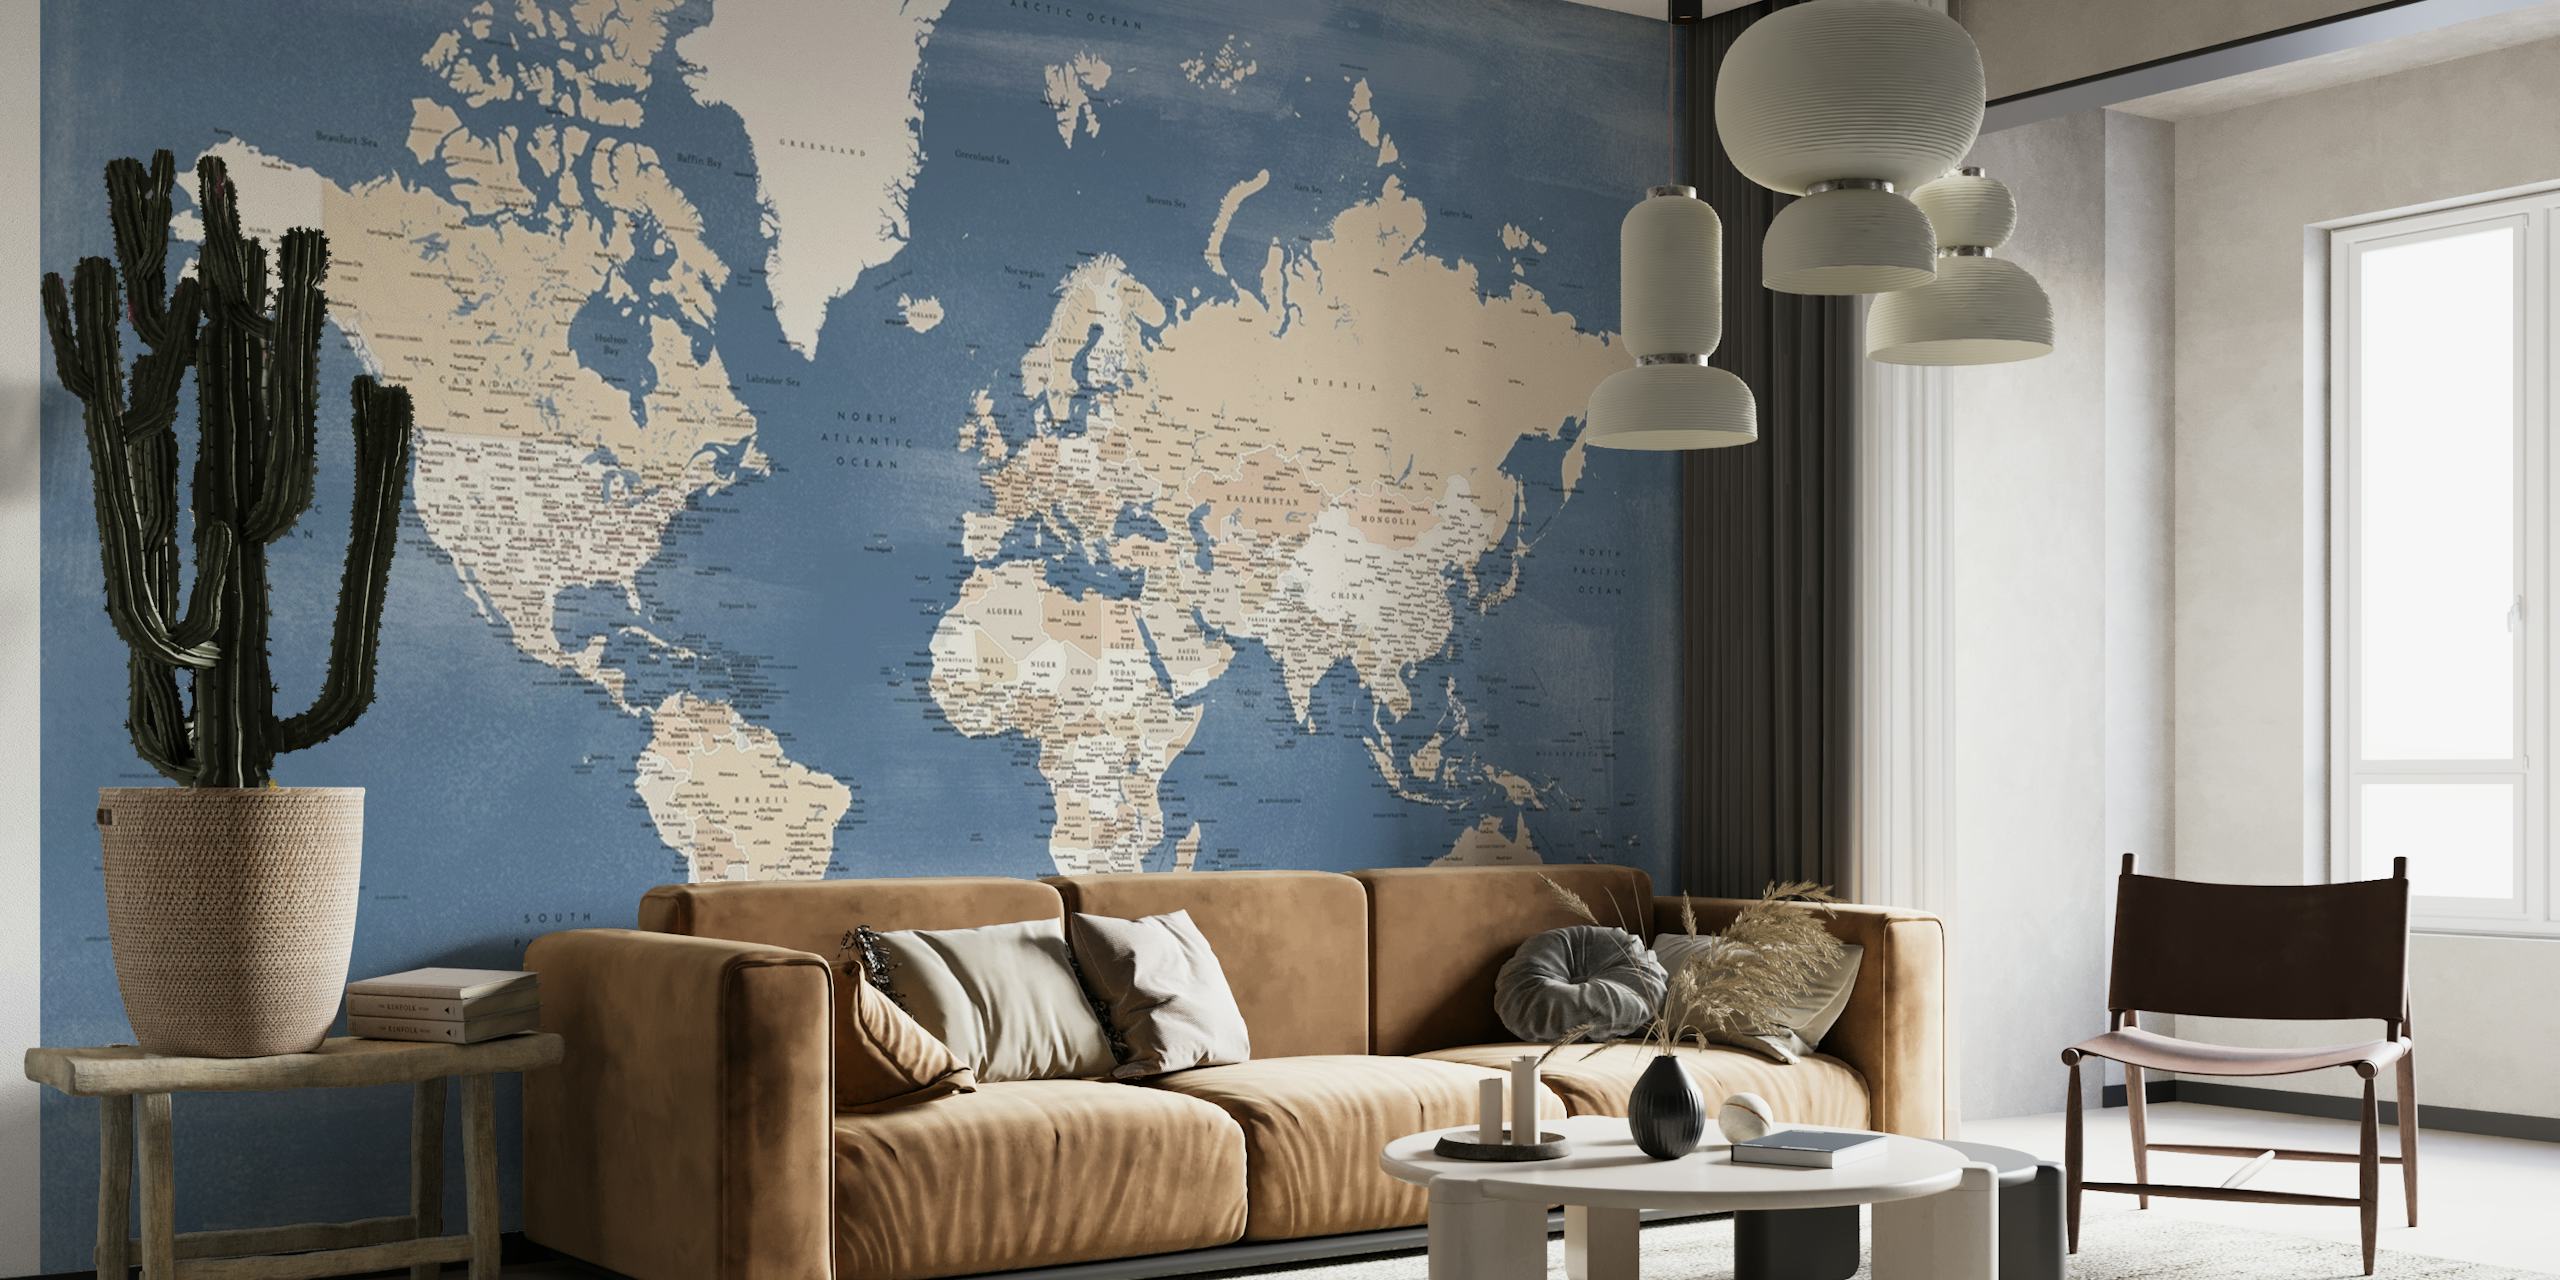 Vintage-style world map wall mural on a blue background